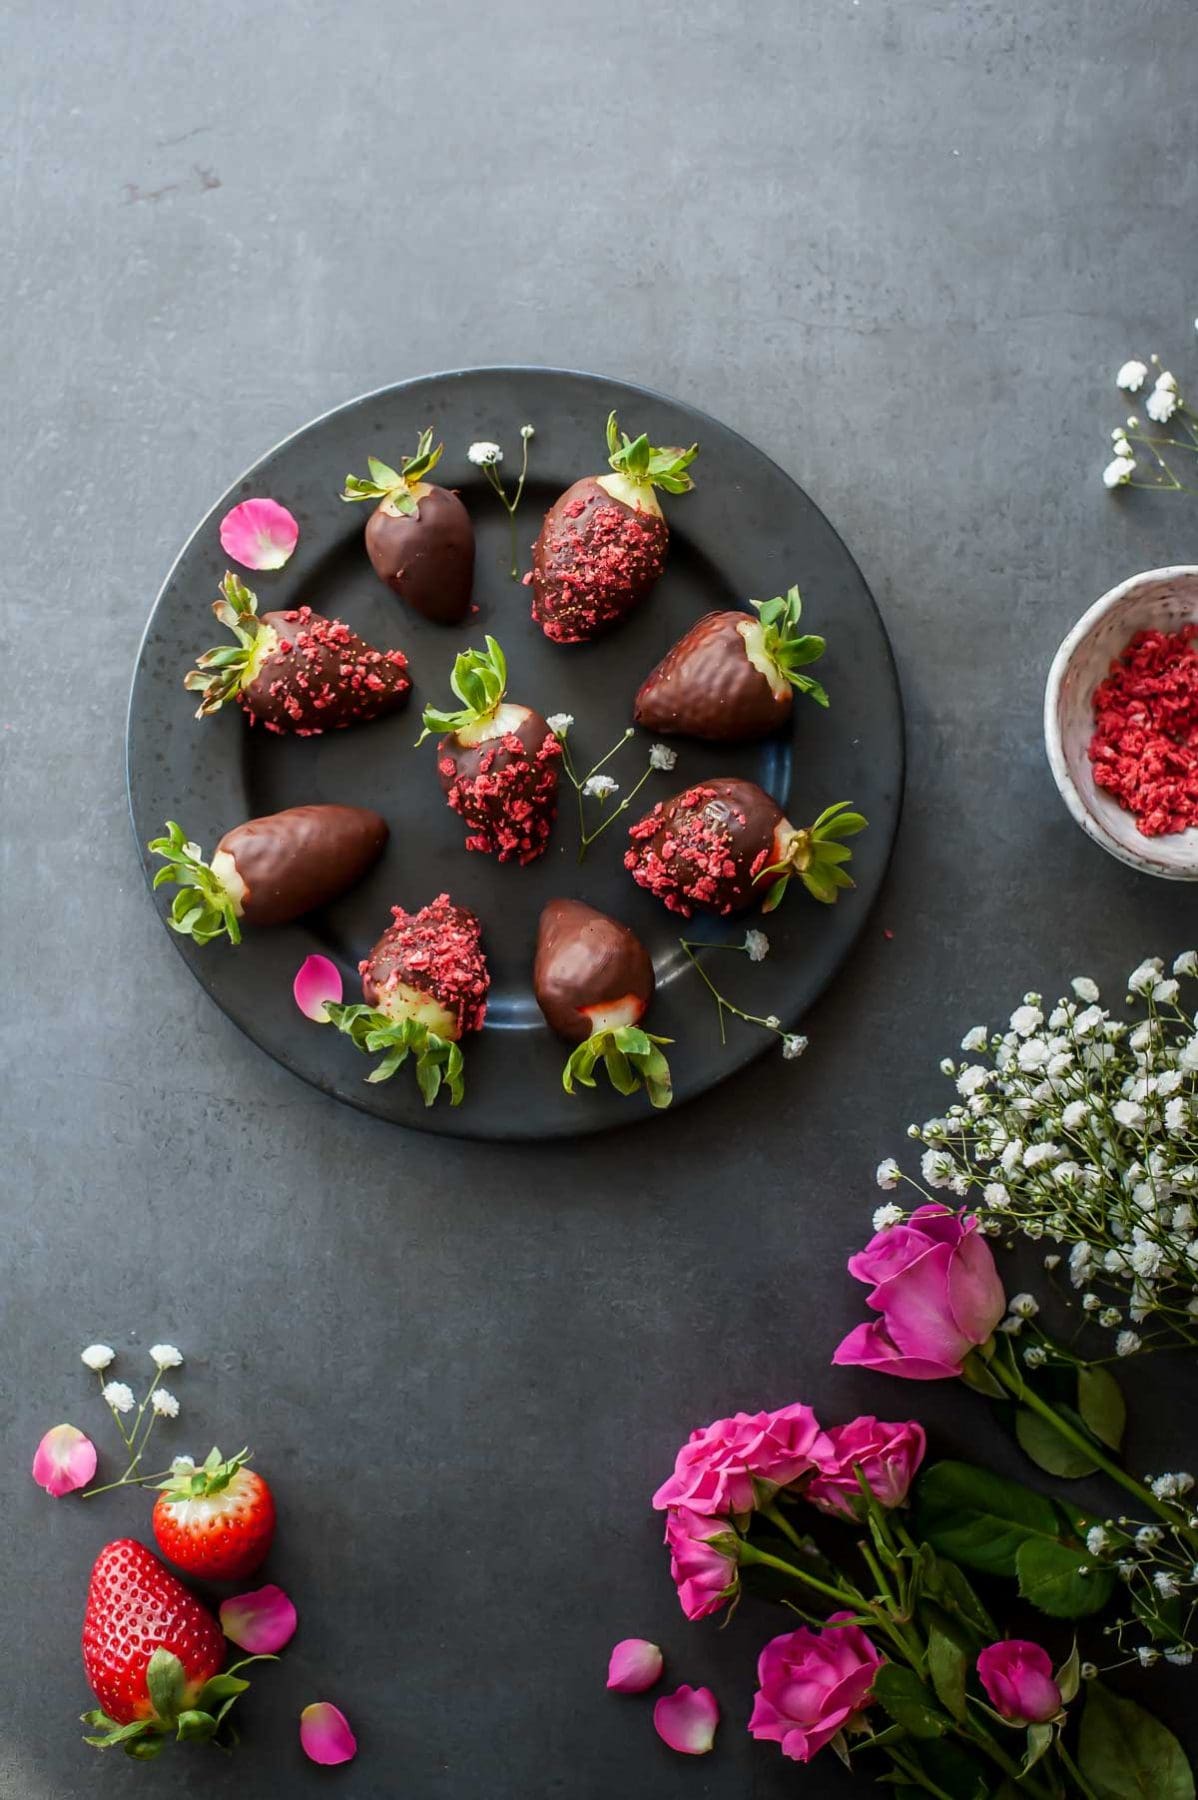 Chocolate covered strawberries on a black plate, roses and flowers around the plate.